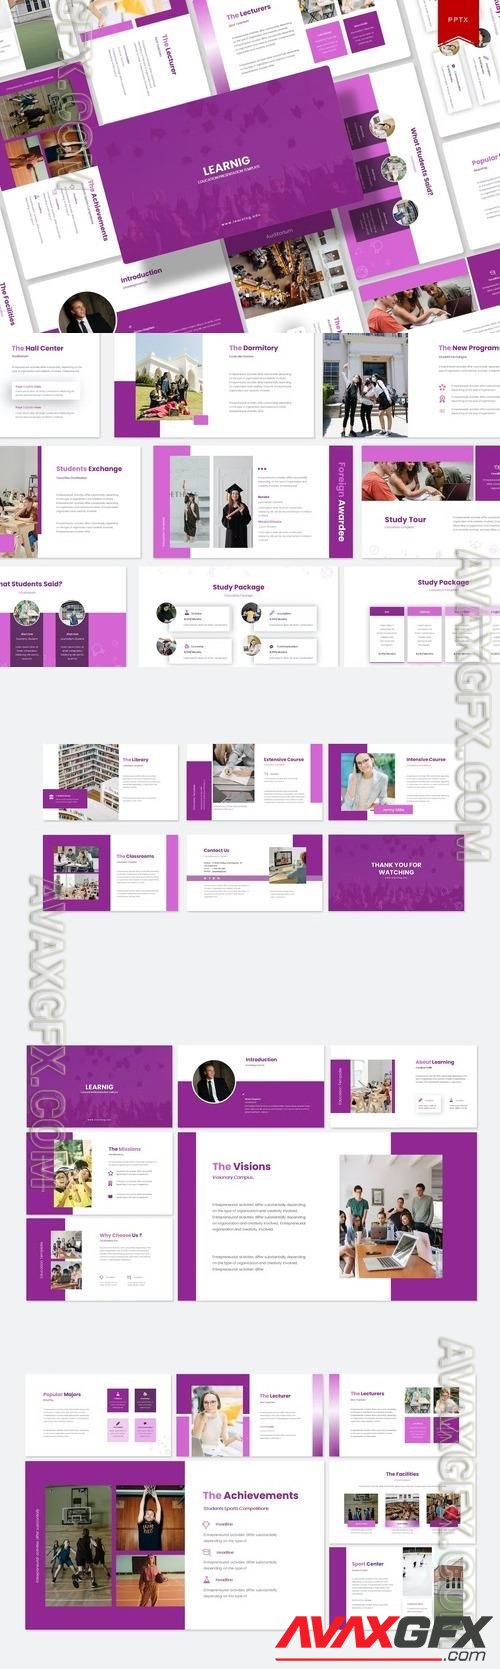 Learning Education Powerpoint Template [PPTX]